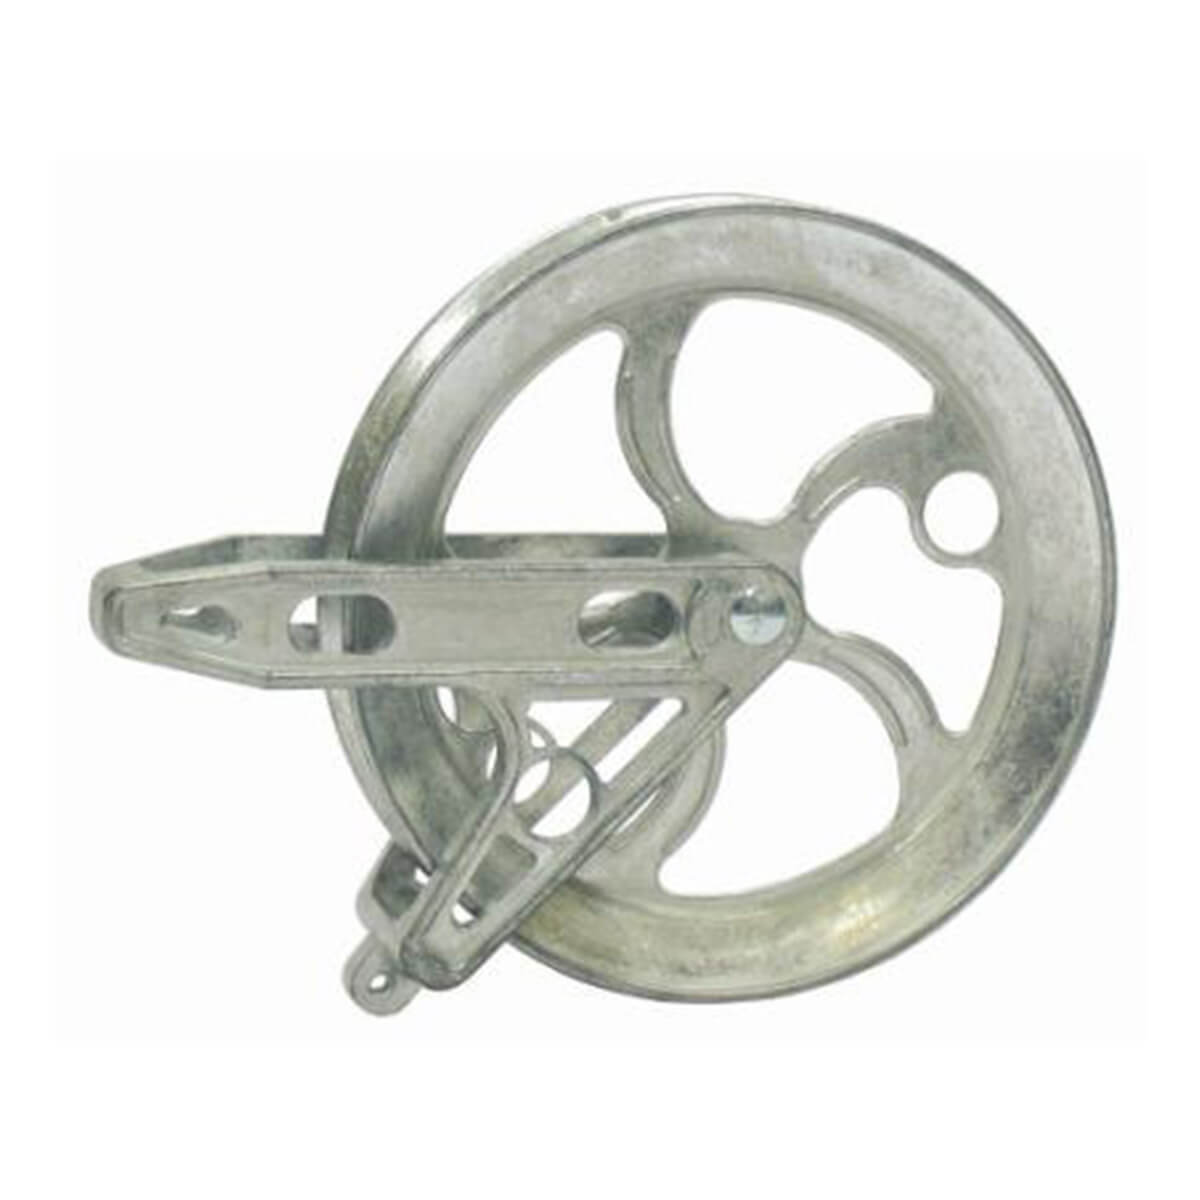 6-1/2" Clothesline Pulley